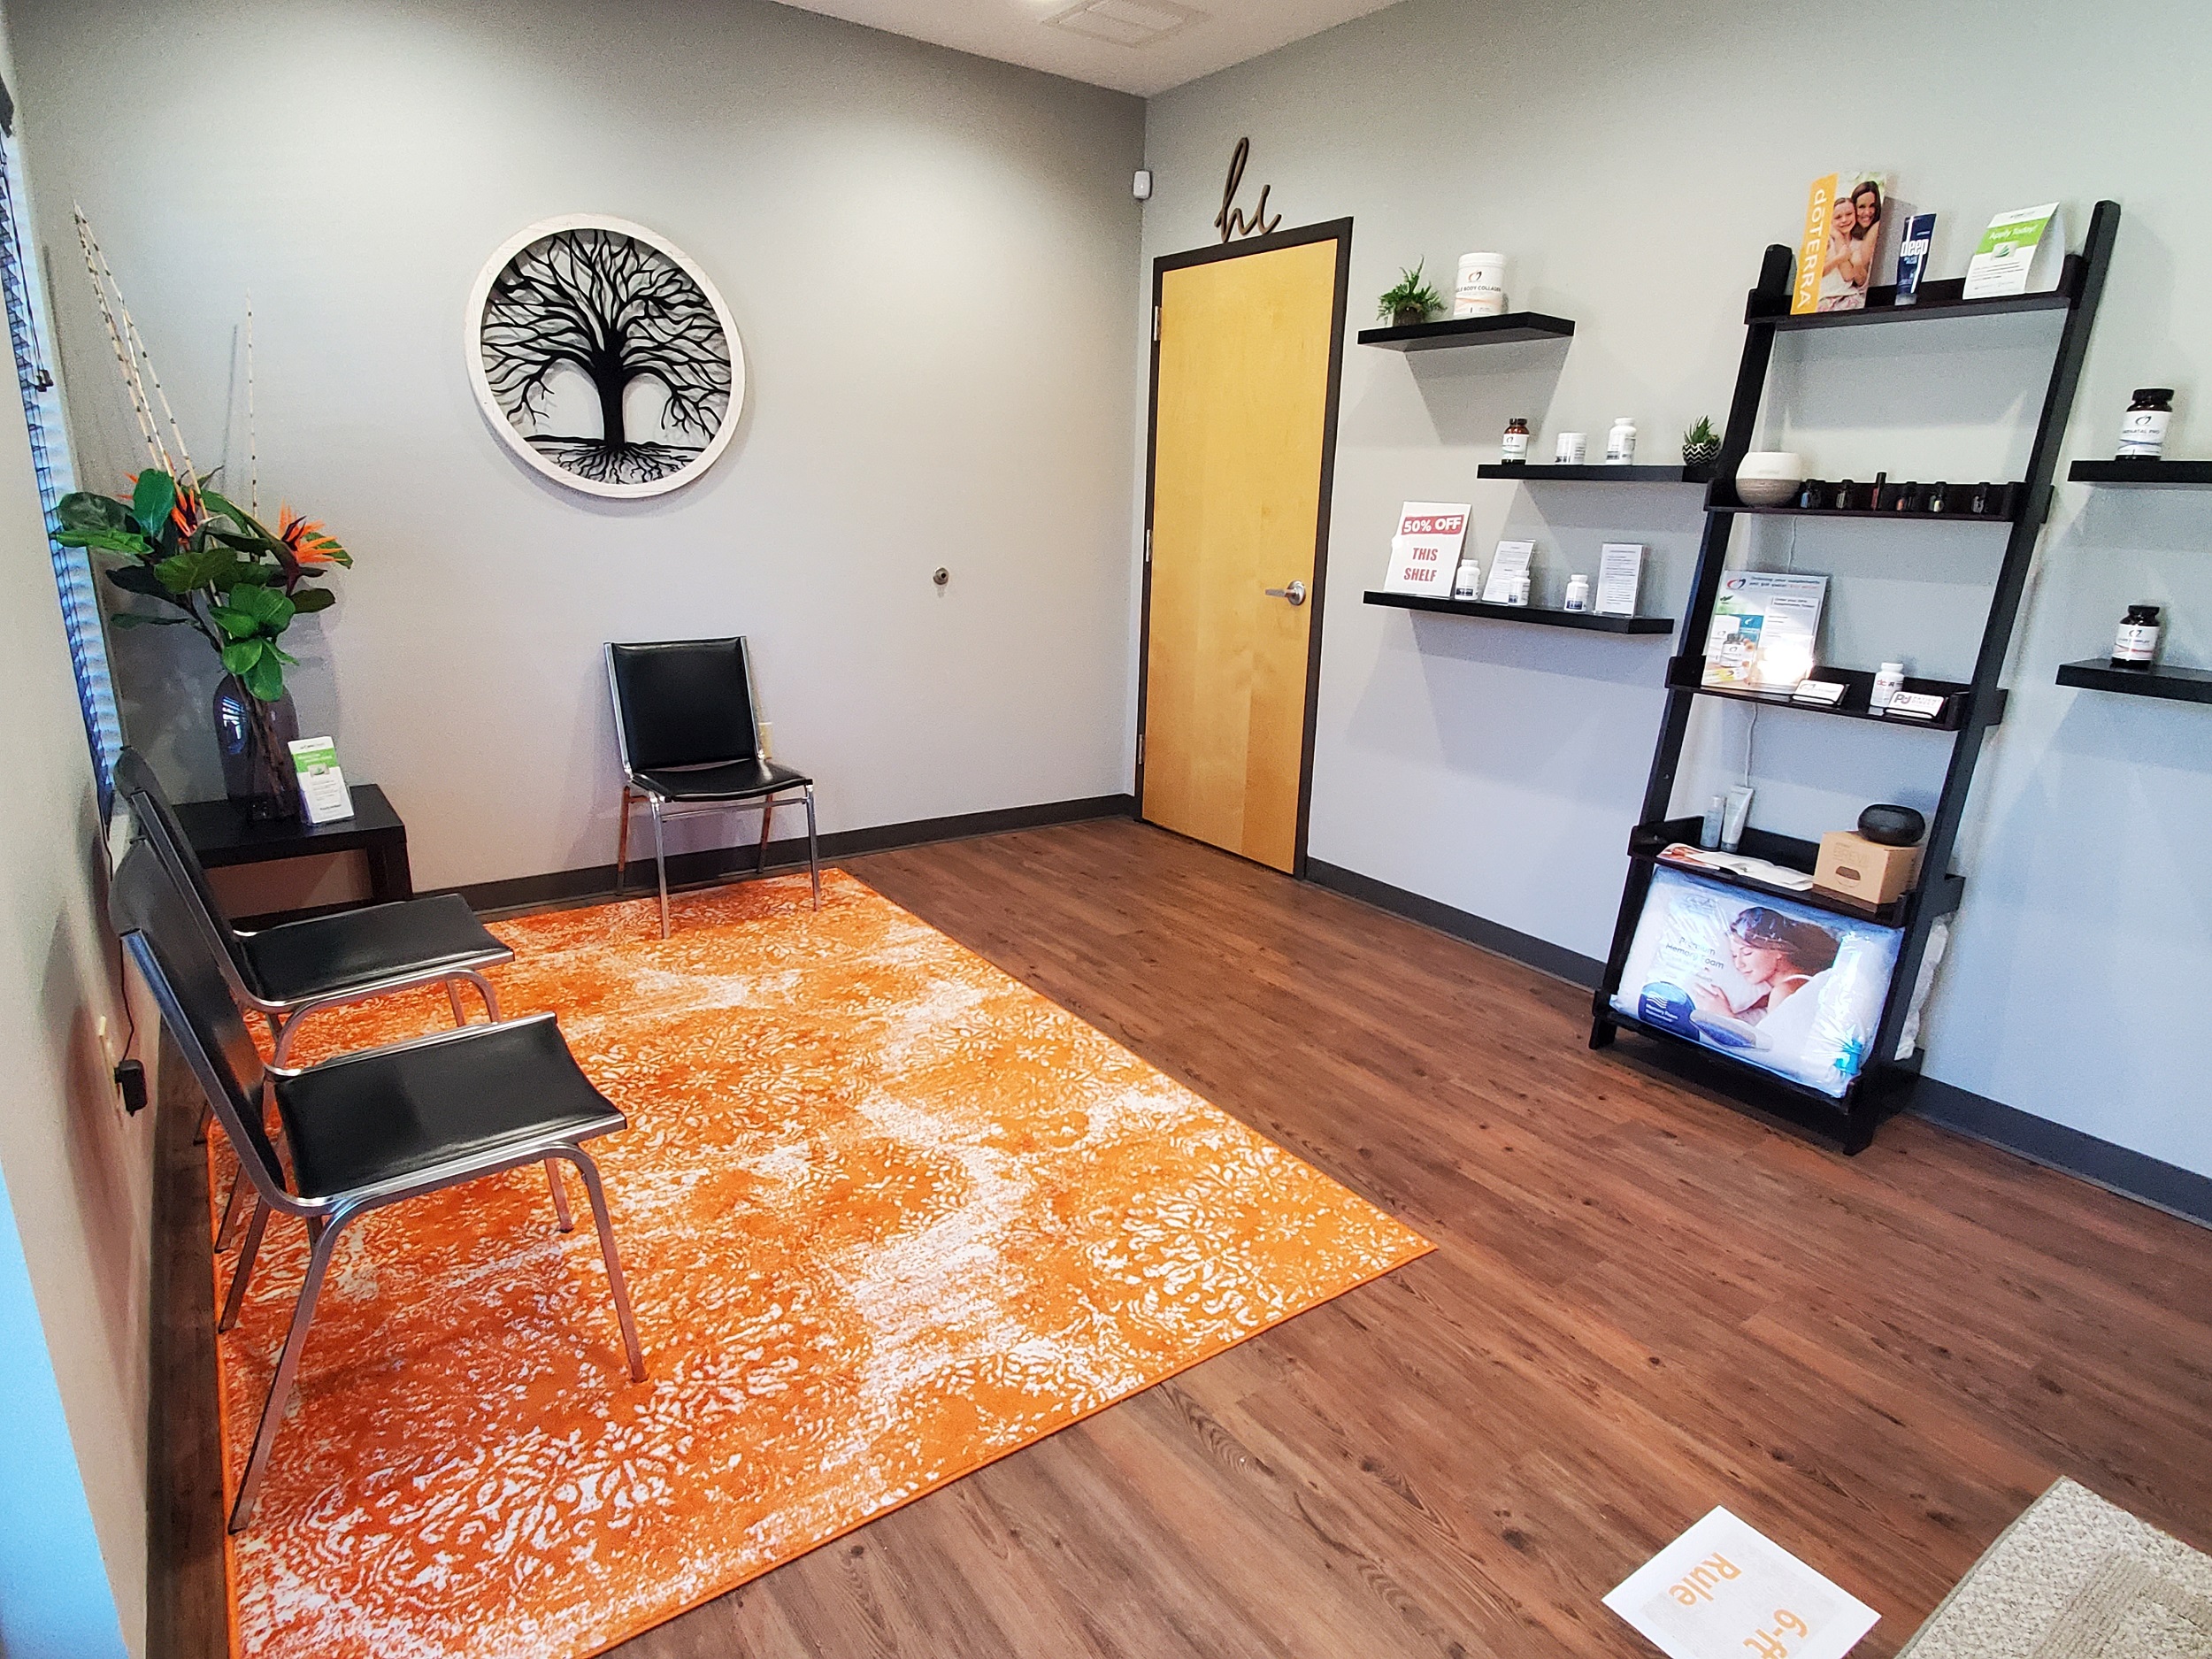 the-allergy-and-spine-center-hendersonville-tn-dr-brittany-bowers-chiropractic-acupuncture-allergy-testing-front-lobby-entrance-waiting-area-2